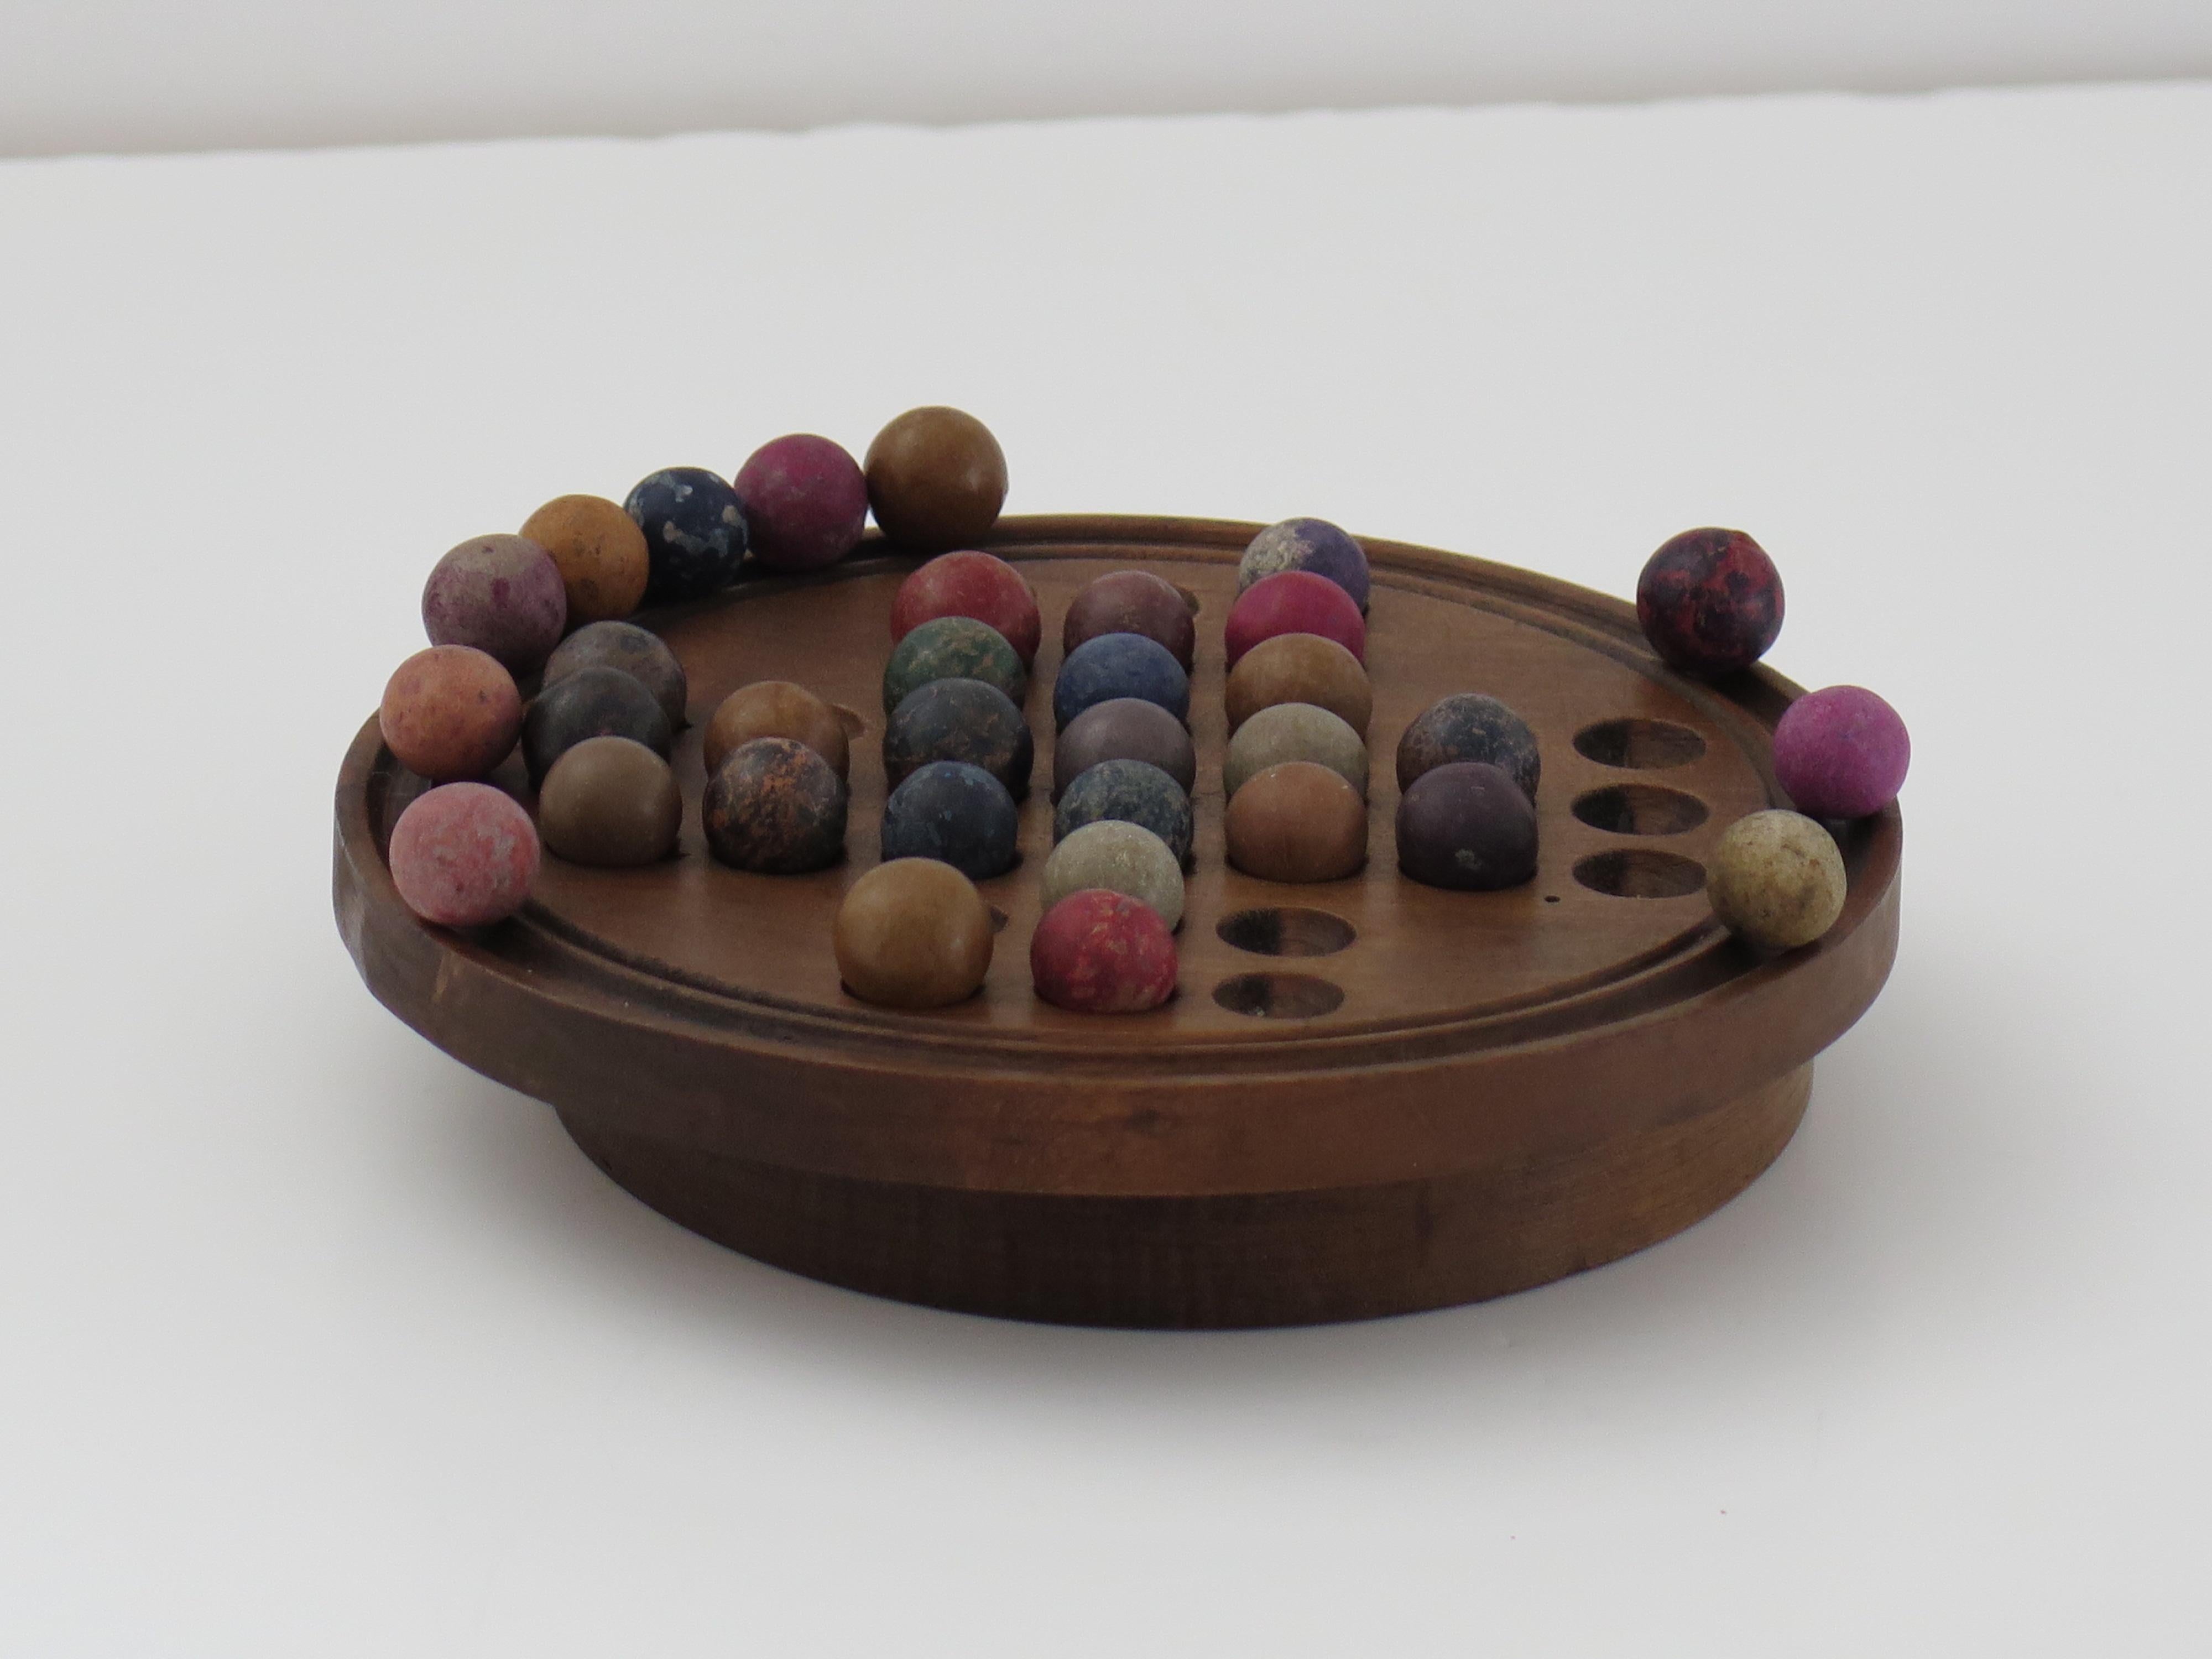 Victorian 19th Century Travelling Marble Solitaire Game with 33 Handmade Clay Marbles For Sale